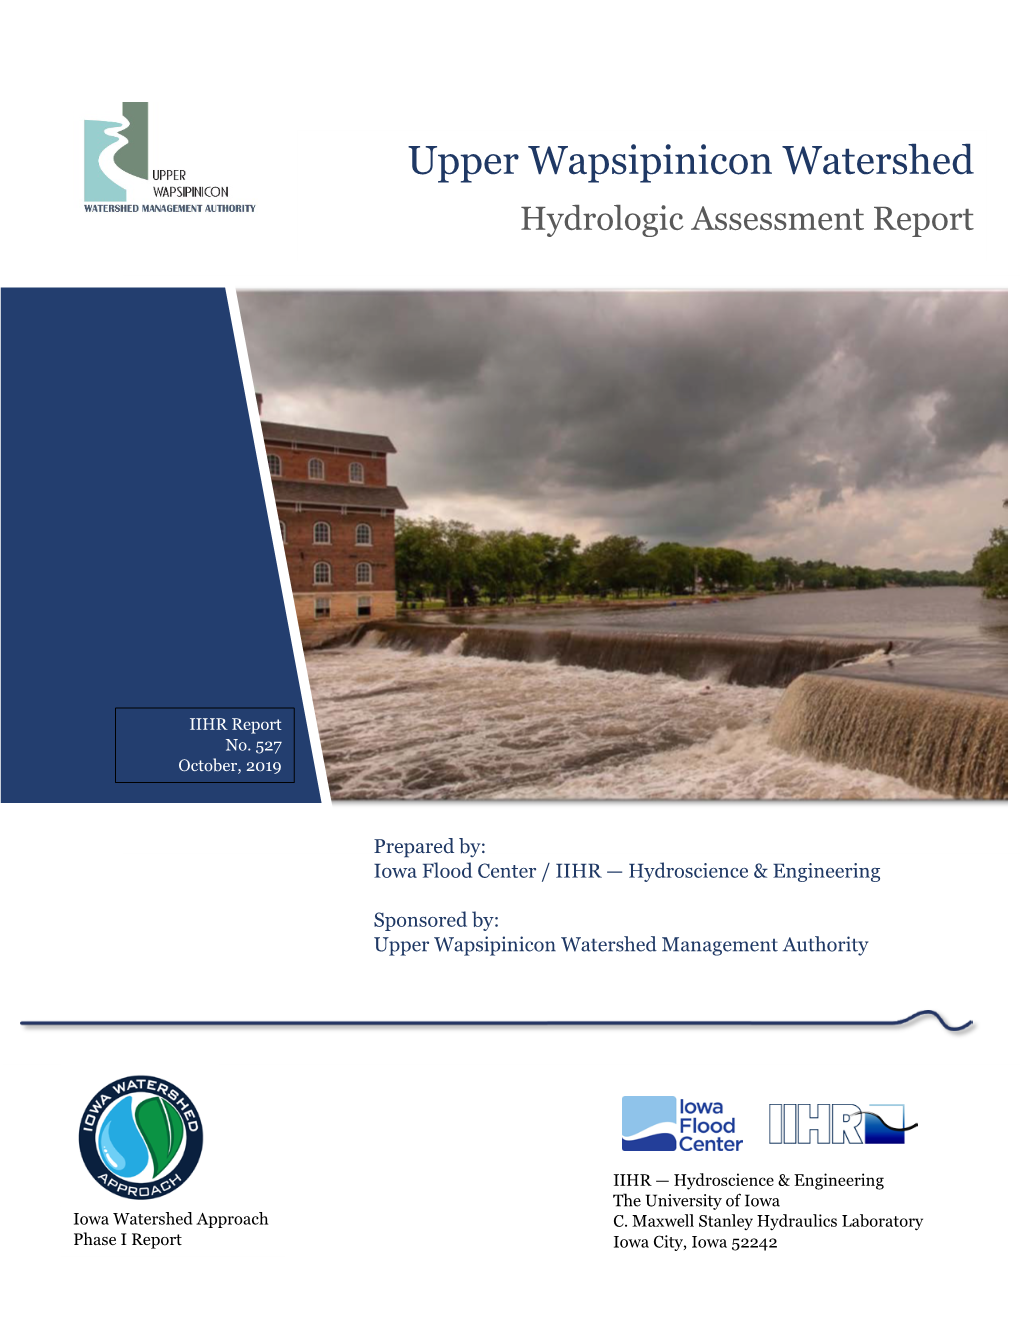 Upper Wapsipinicon River Watershed Hydrologic Assessment